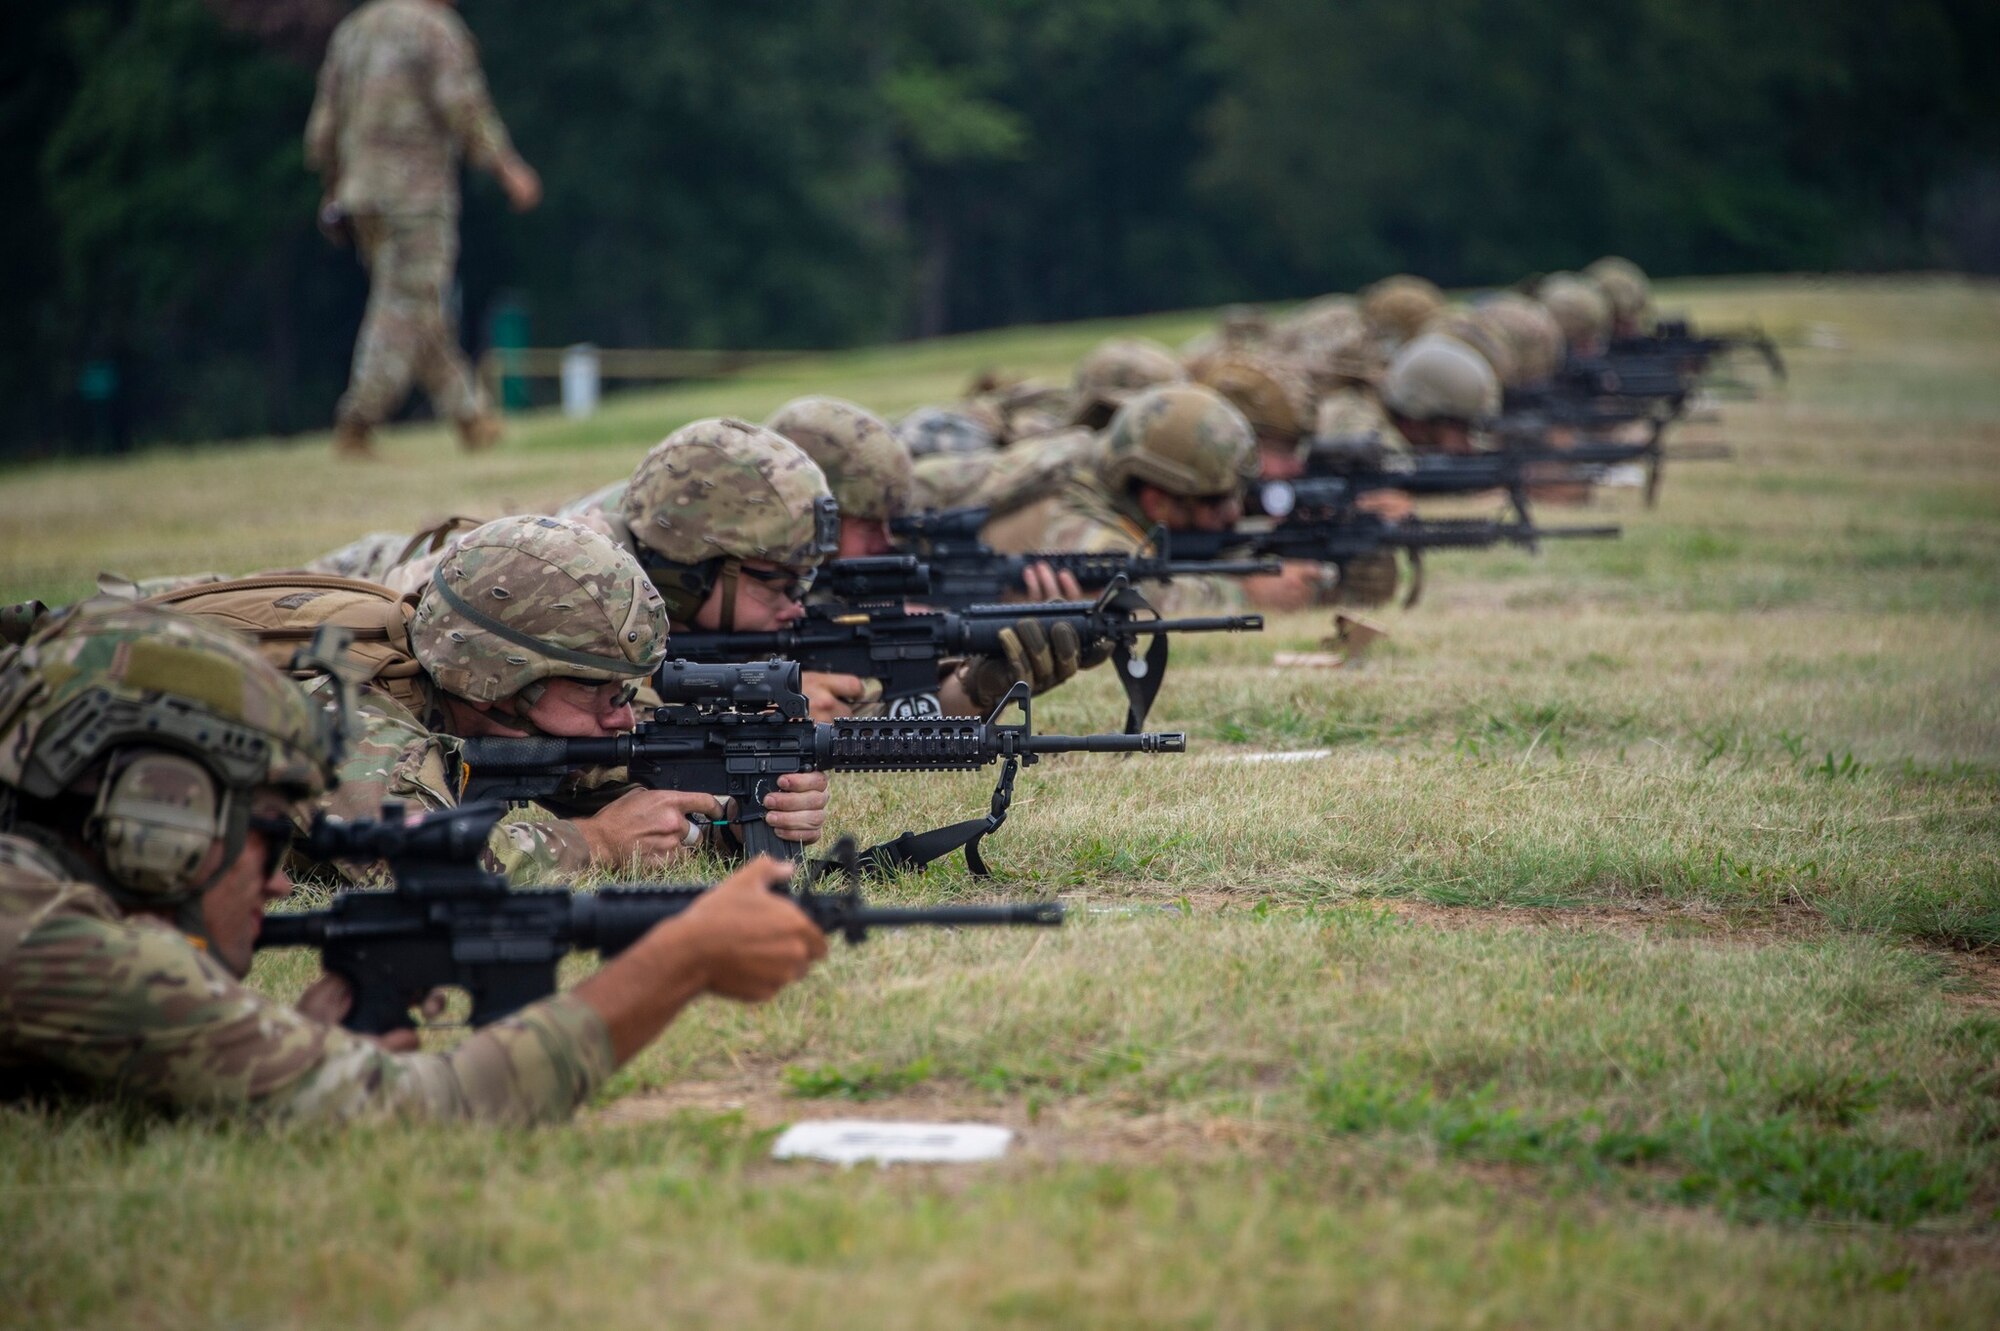 U.S. Soldiers and Airmen lay prone on a rifle range preparing to fire.